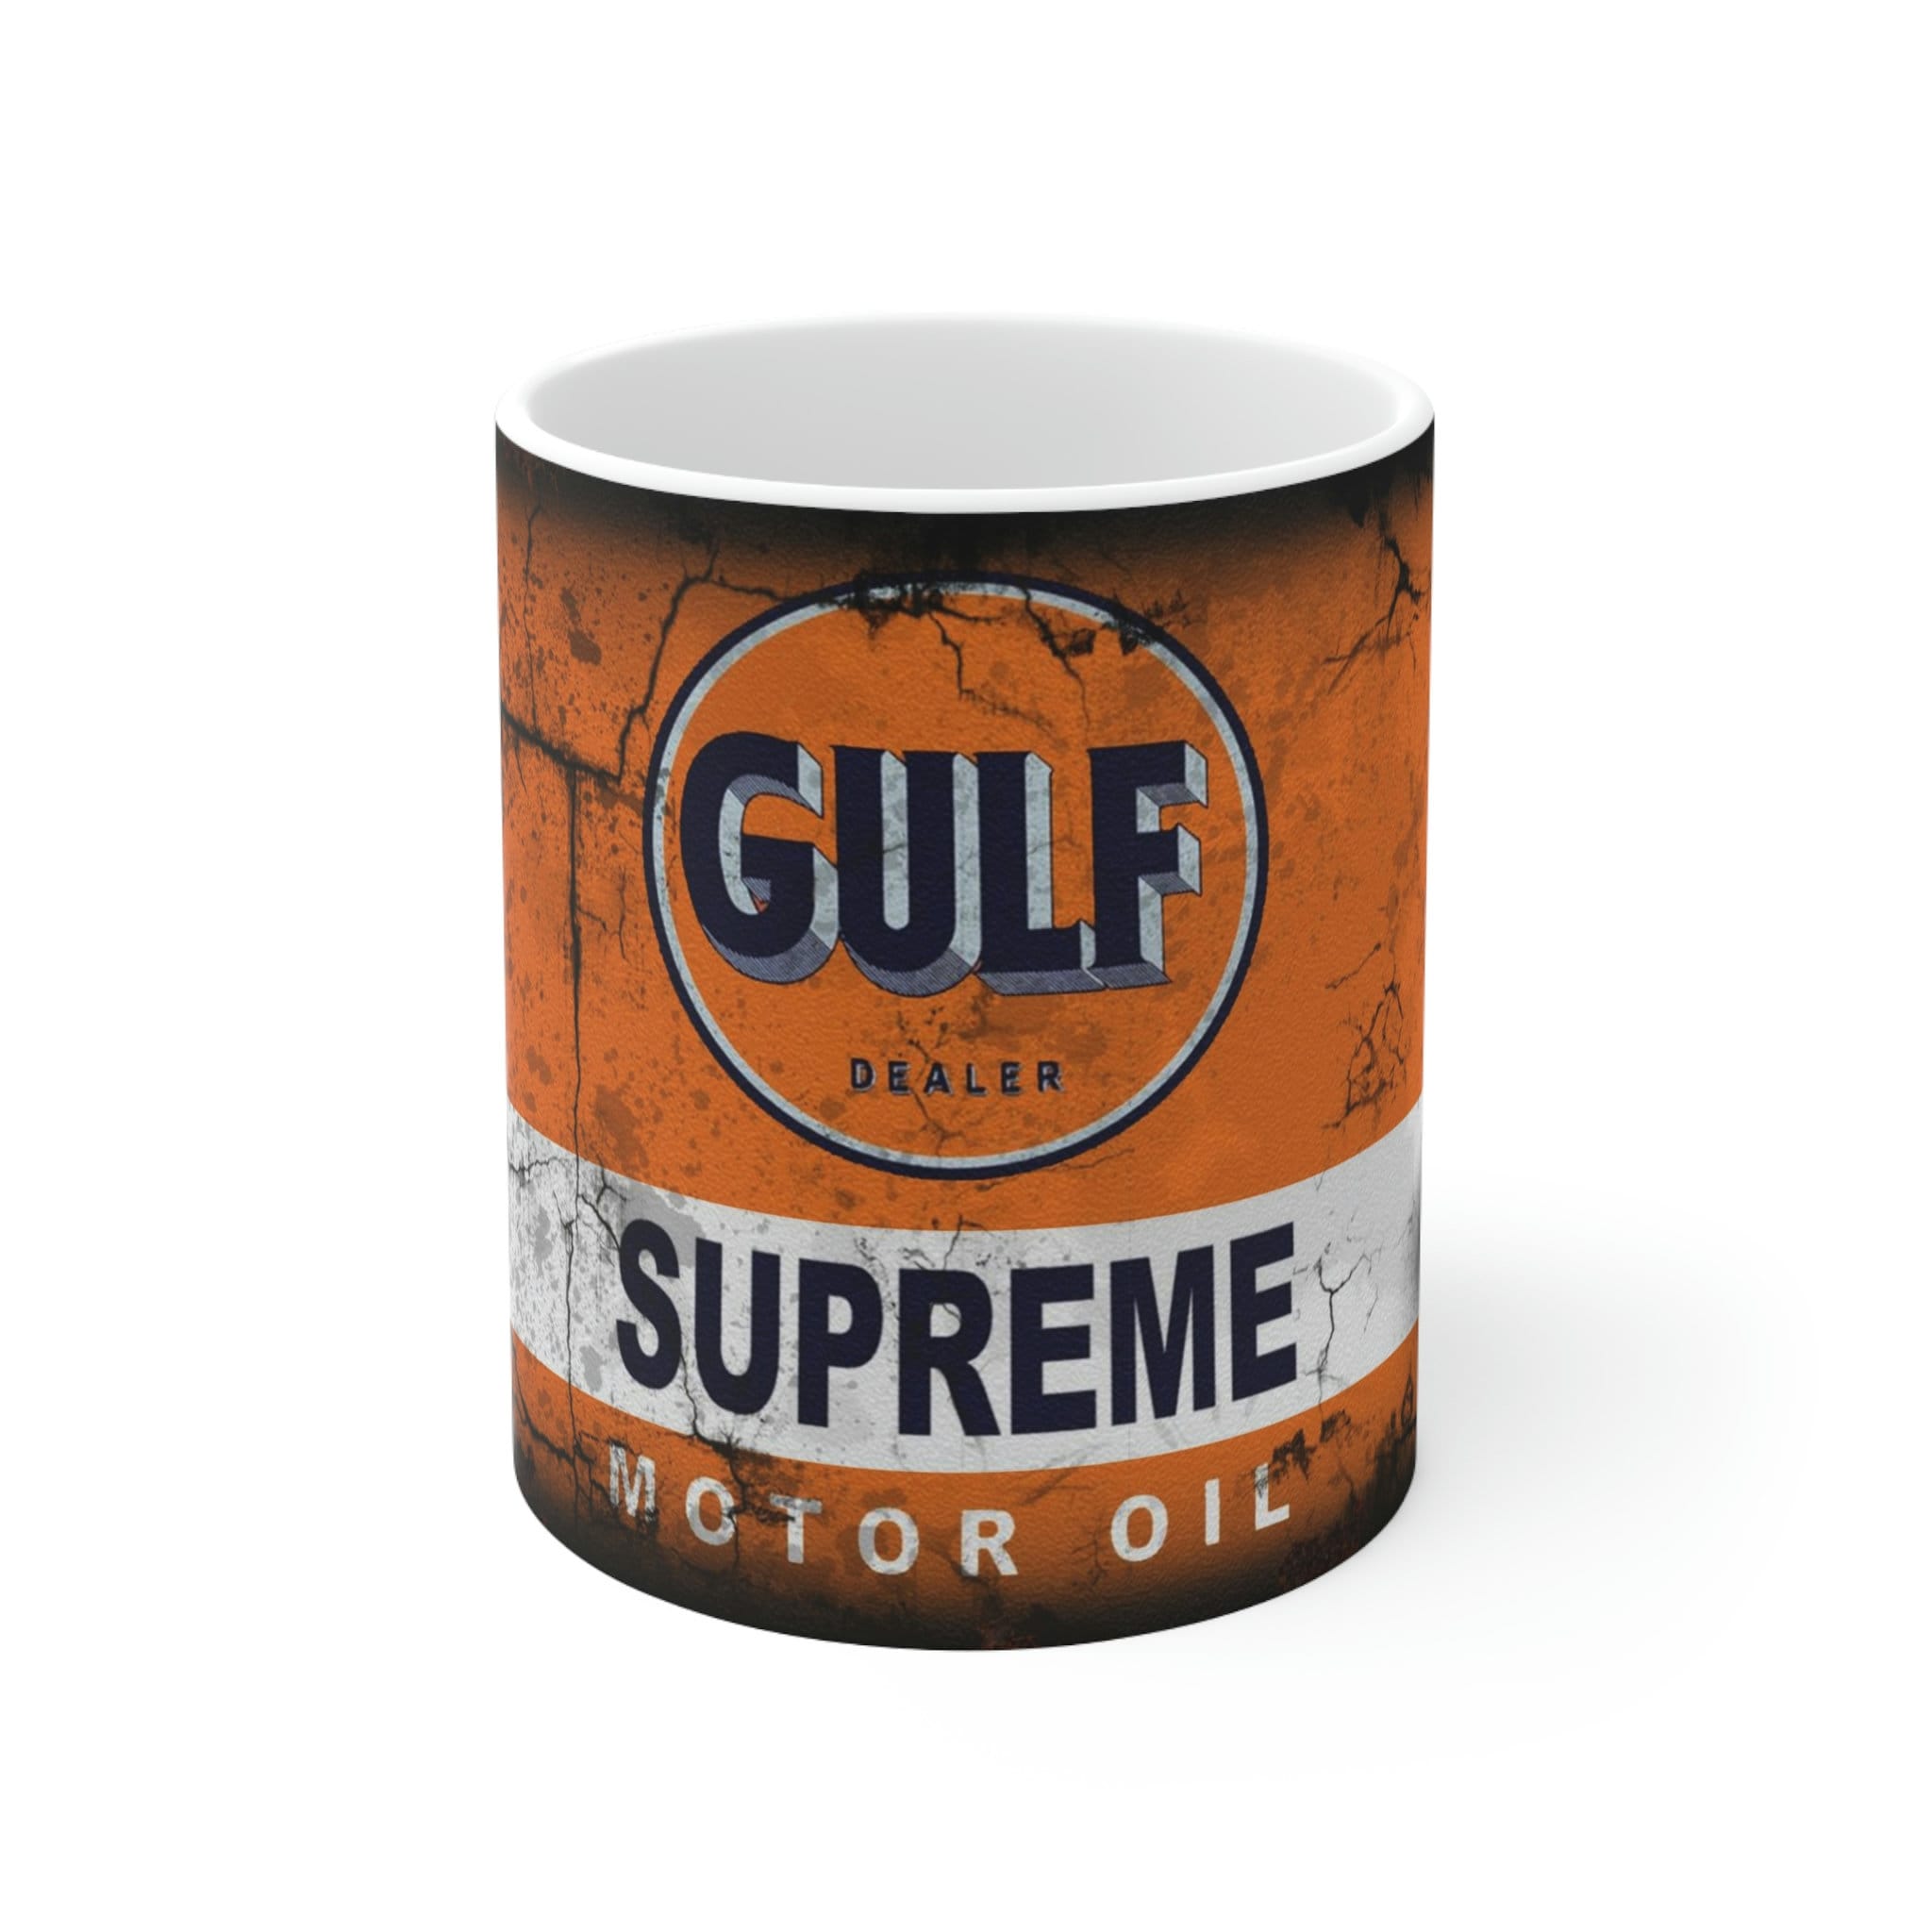 C1950s Gulfwax Gulf Wax Paraffine for Preserving Gulf Oil Corp. Gulf  Refining Co. Pittsburgh, PA., Gas Station Decor, Fruit Canning Jar 3 